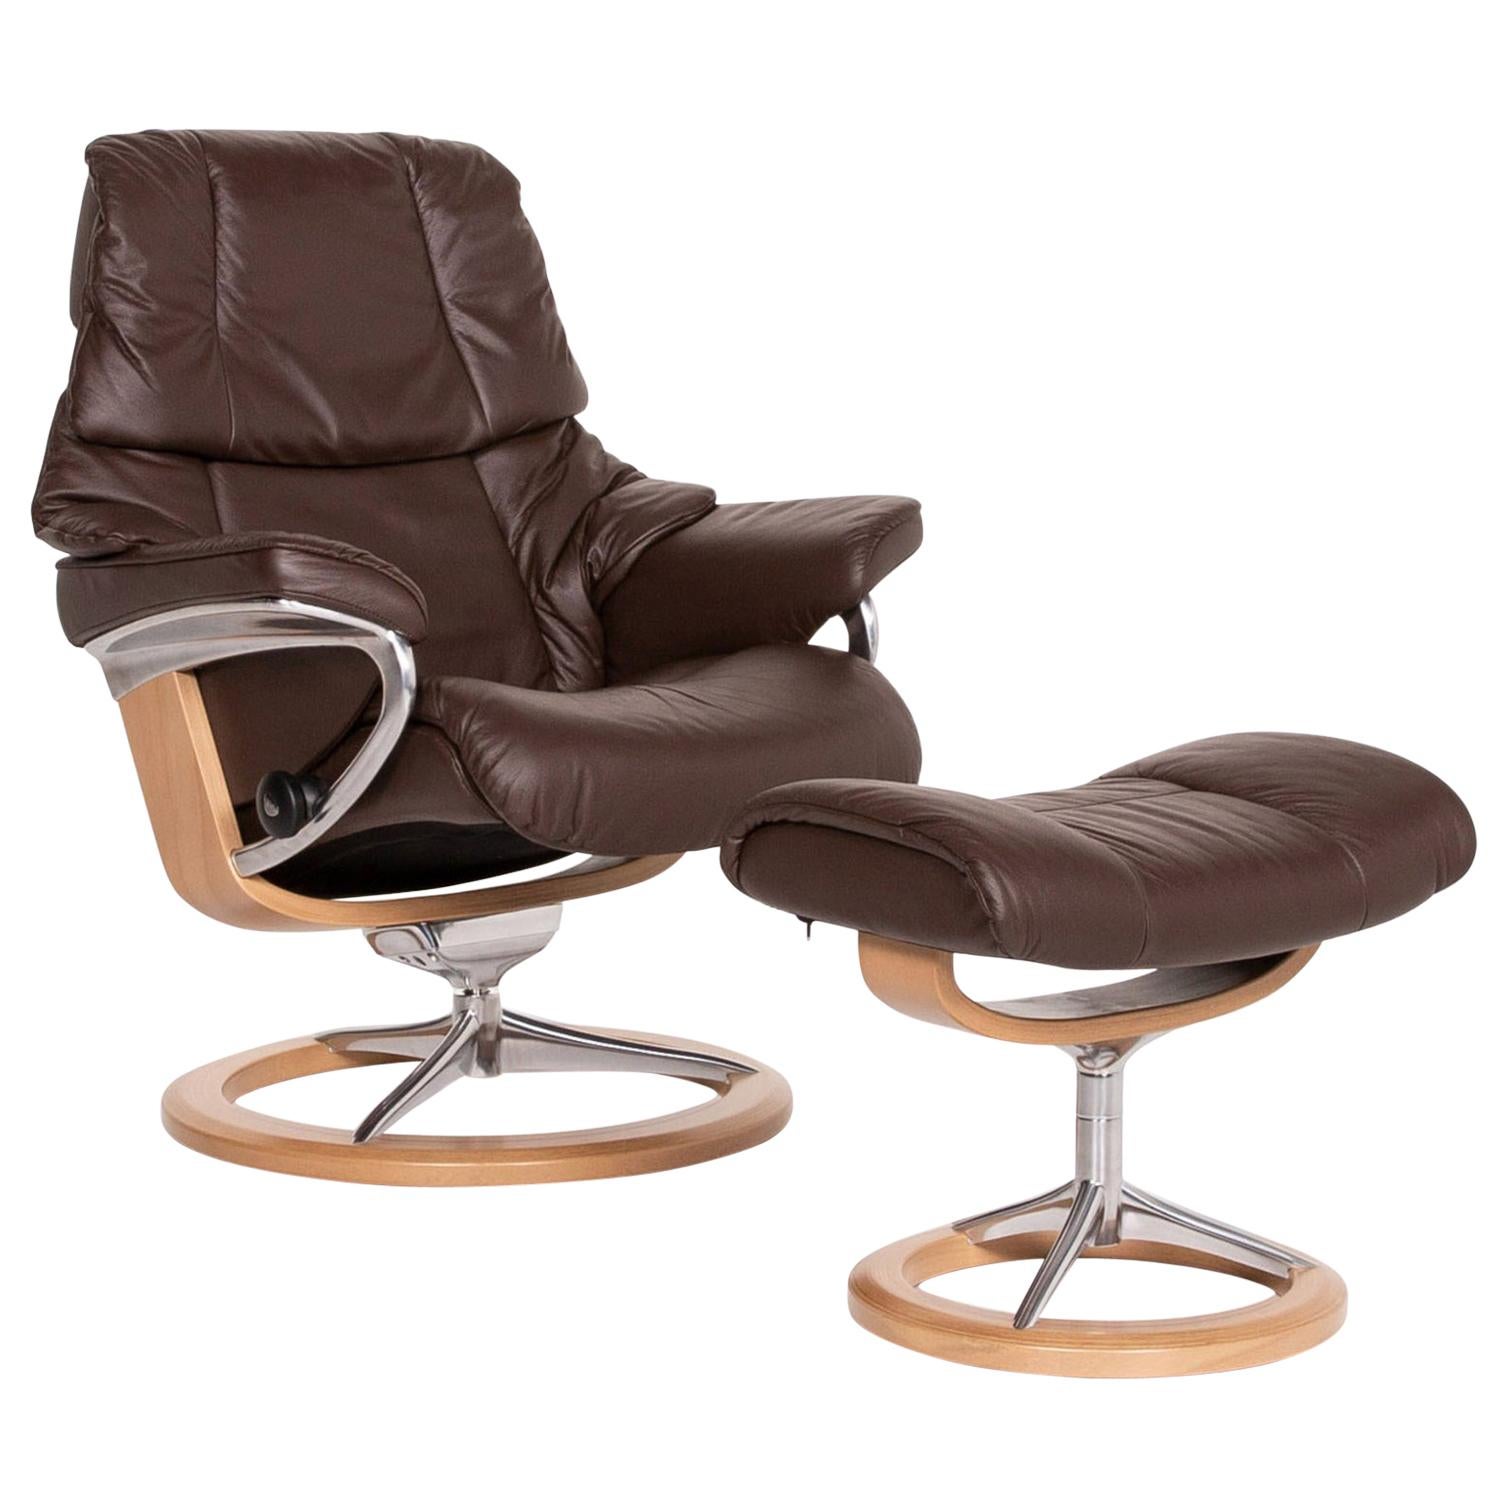 Stressless Reno Leather Armchair Incl. Stool Dark Brown Brown Relaxation